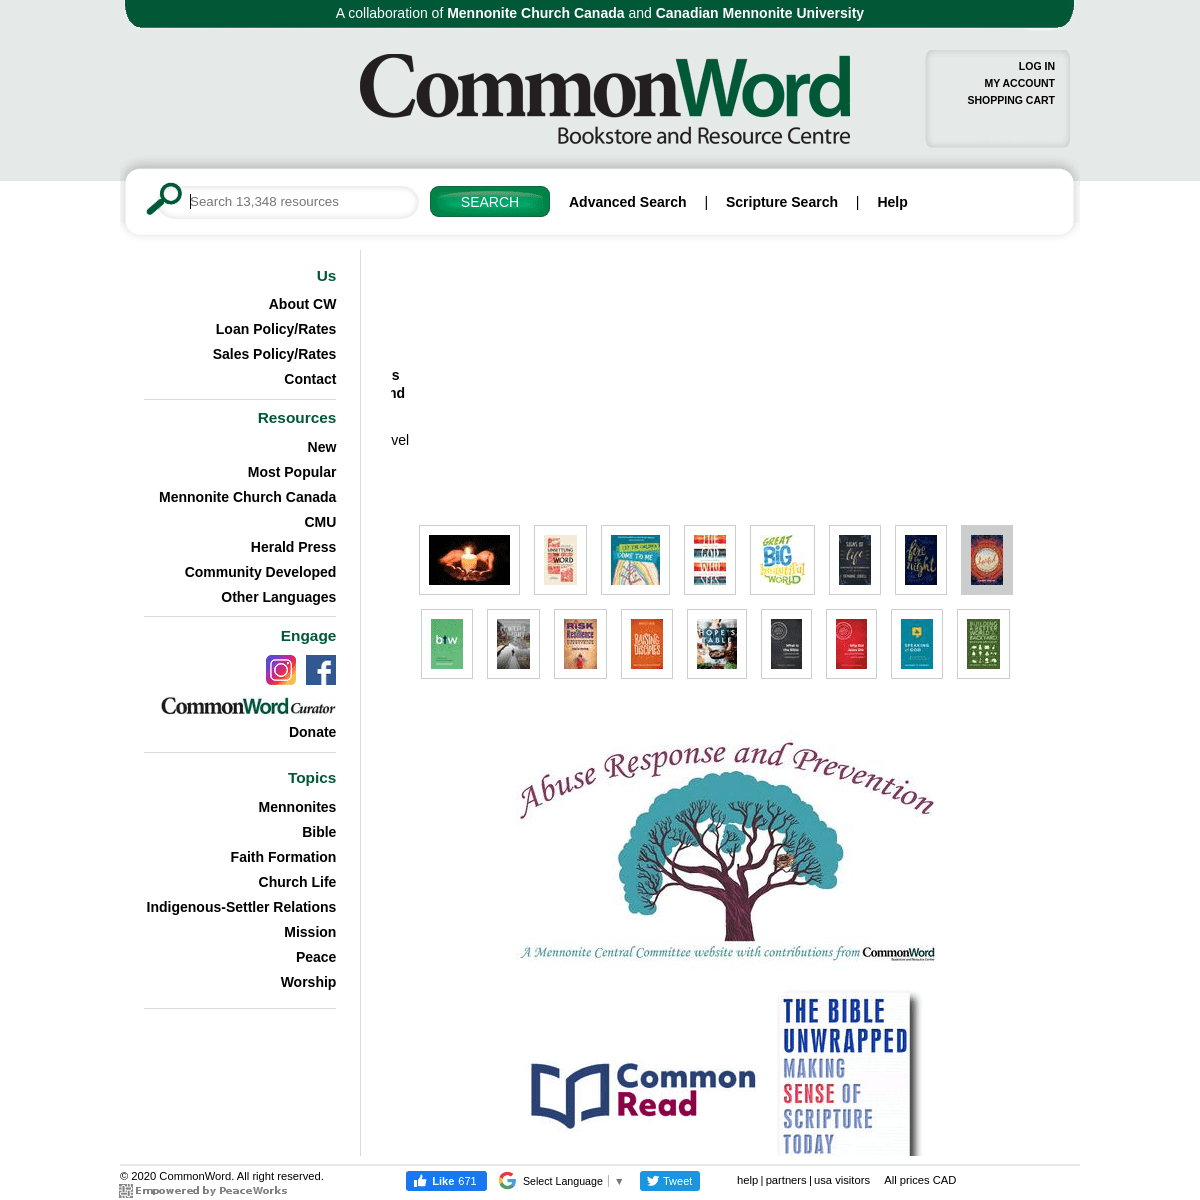 A complete backup of commonword.ca